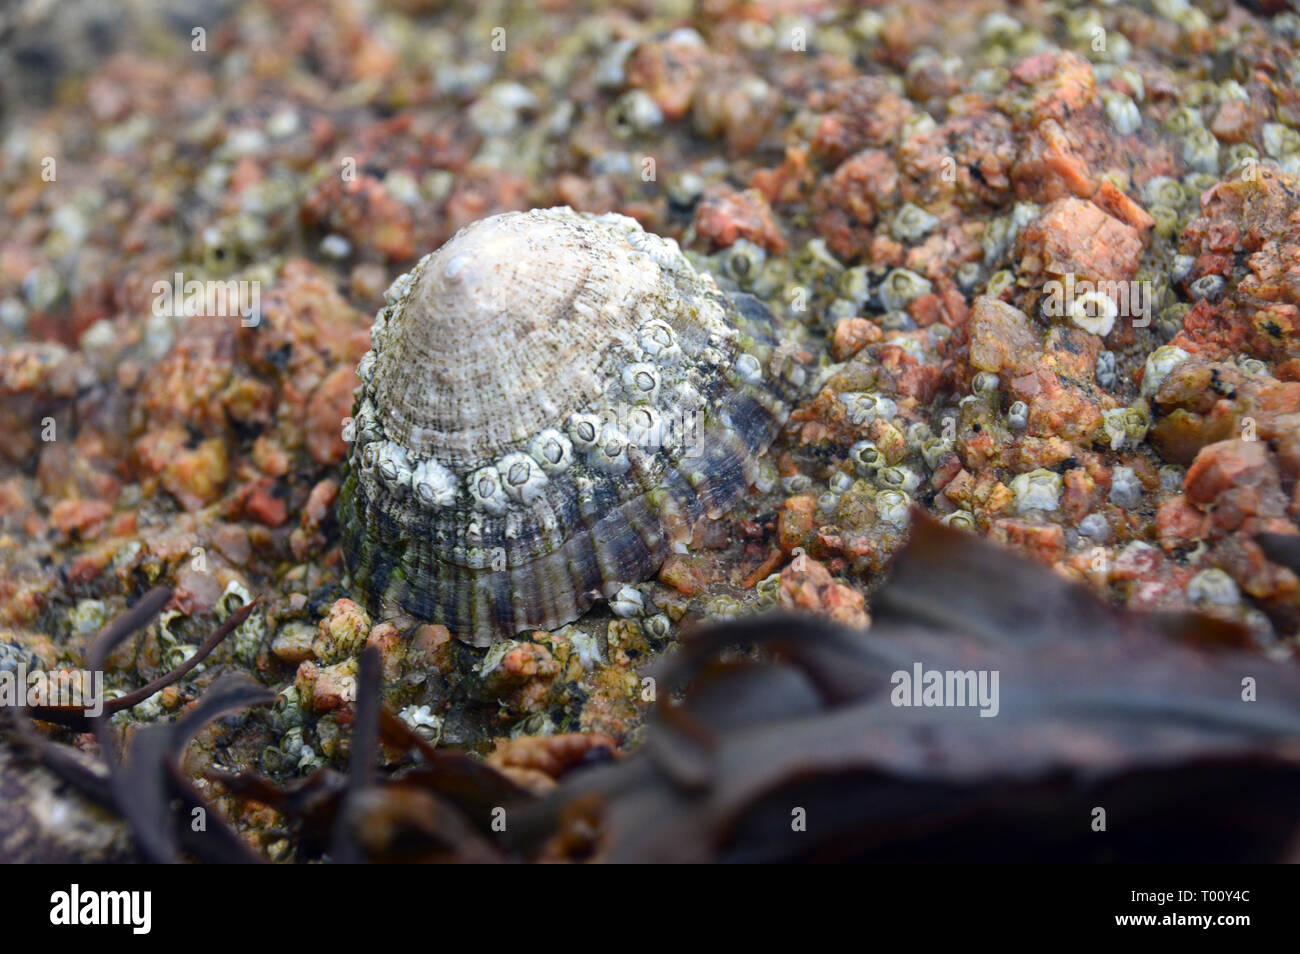 Close up of a Common Limpet (Patella vulgata) on Rocks at Low Tide off La Rocque Point on the Island of Jersey, Channel Isles, UK. Stock Photo